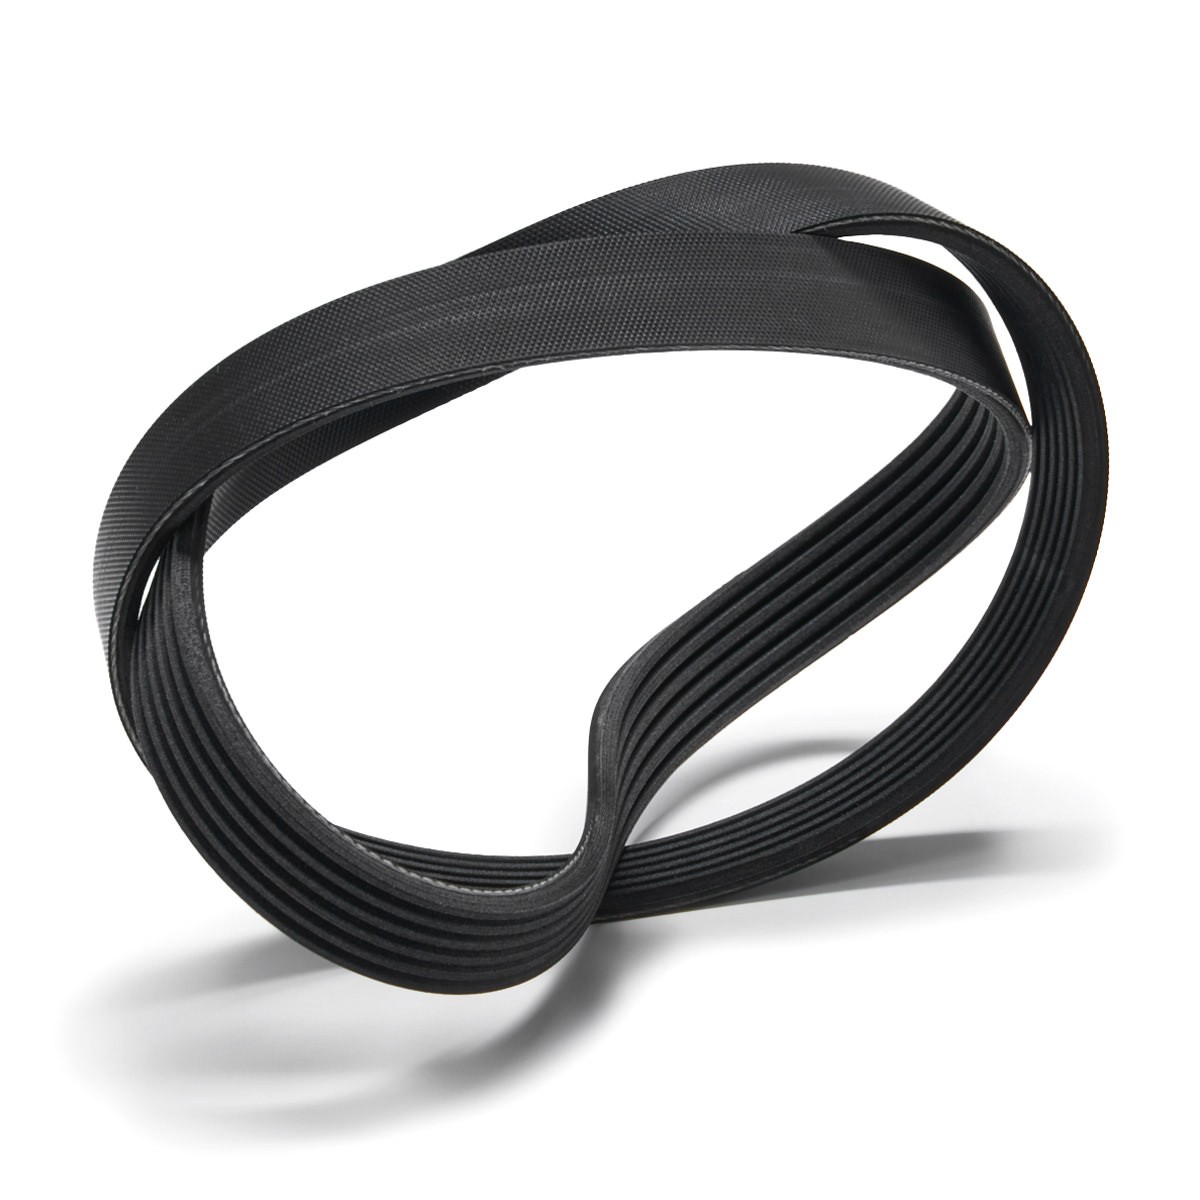 Auxiliary belt 6PK1026 review